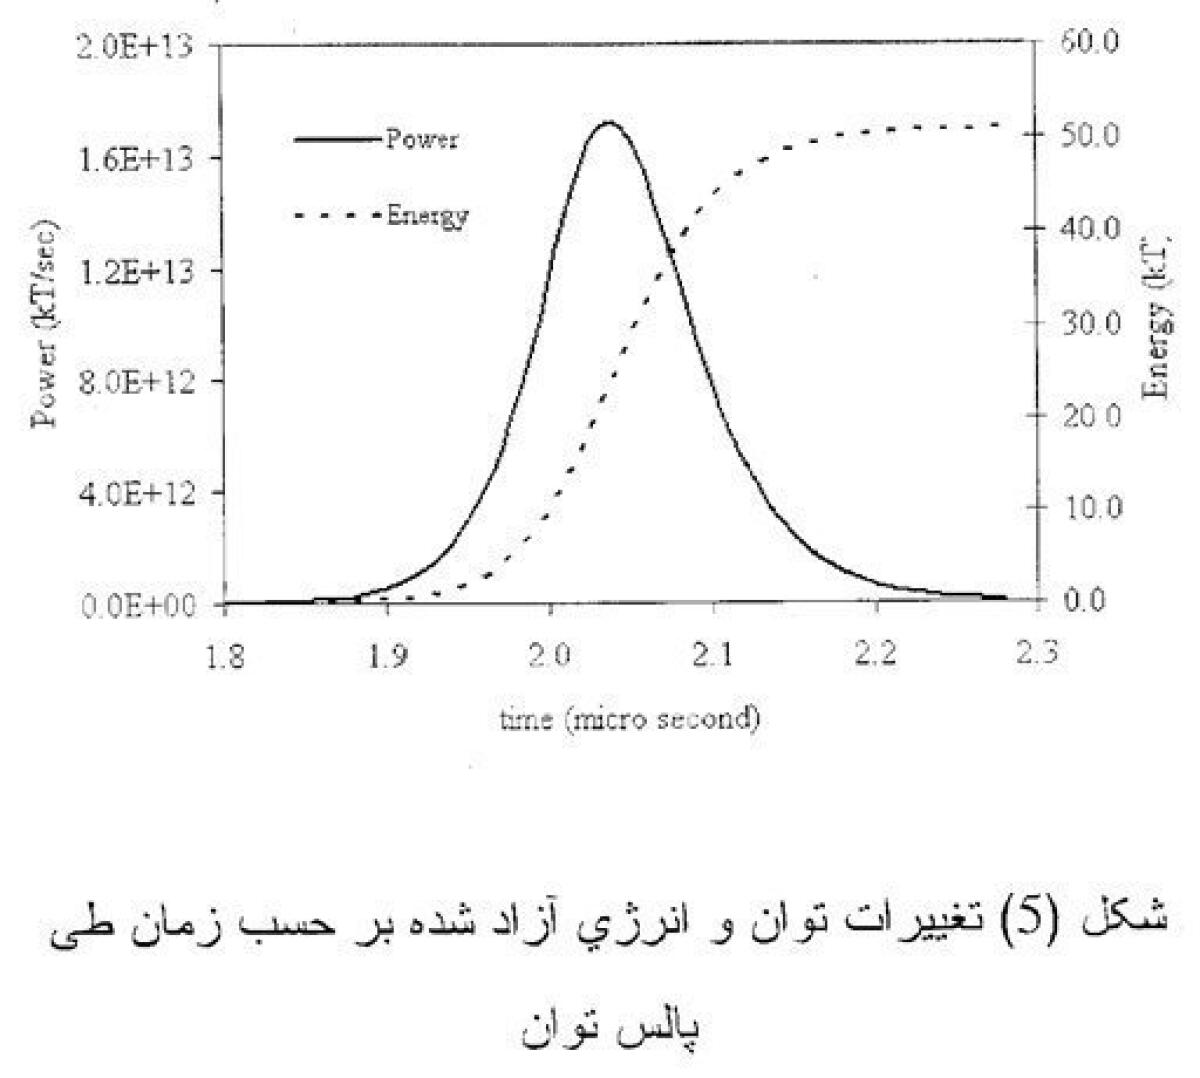 The undated diagram that was given to the AP by officials of a country critical of Iran's atomic program allegedly calculating the explosive force of a nuclear weapon _ a key step in developing such arms. The diagram shows a bell curve and has variables of time in micro-seconds and power and energy, both in kilotons _ the traditional measurement of the energy output, and hence the destructive power of nuclear weapons. The curve peaks at just above 50 kilotons at around 2 microseconds, reflecting the full force of the weapon being modeled. The Farsi writing at the bottom translates "changes in output and in energy released as a function of time through power pulse" (AP Photo)